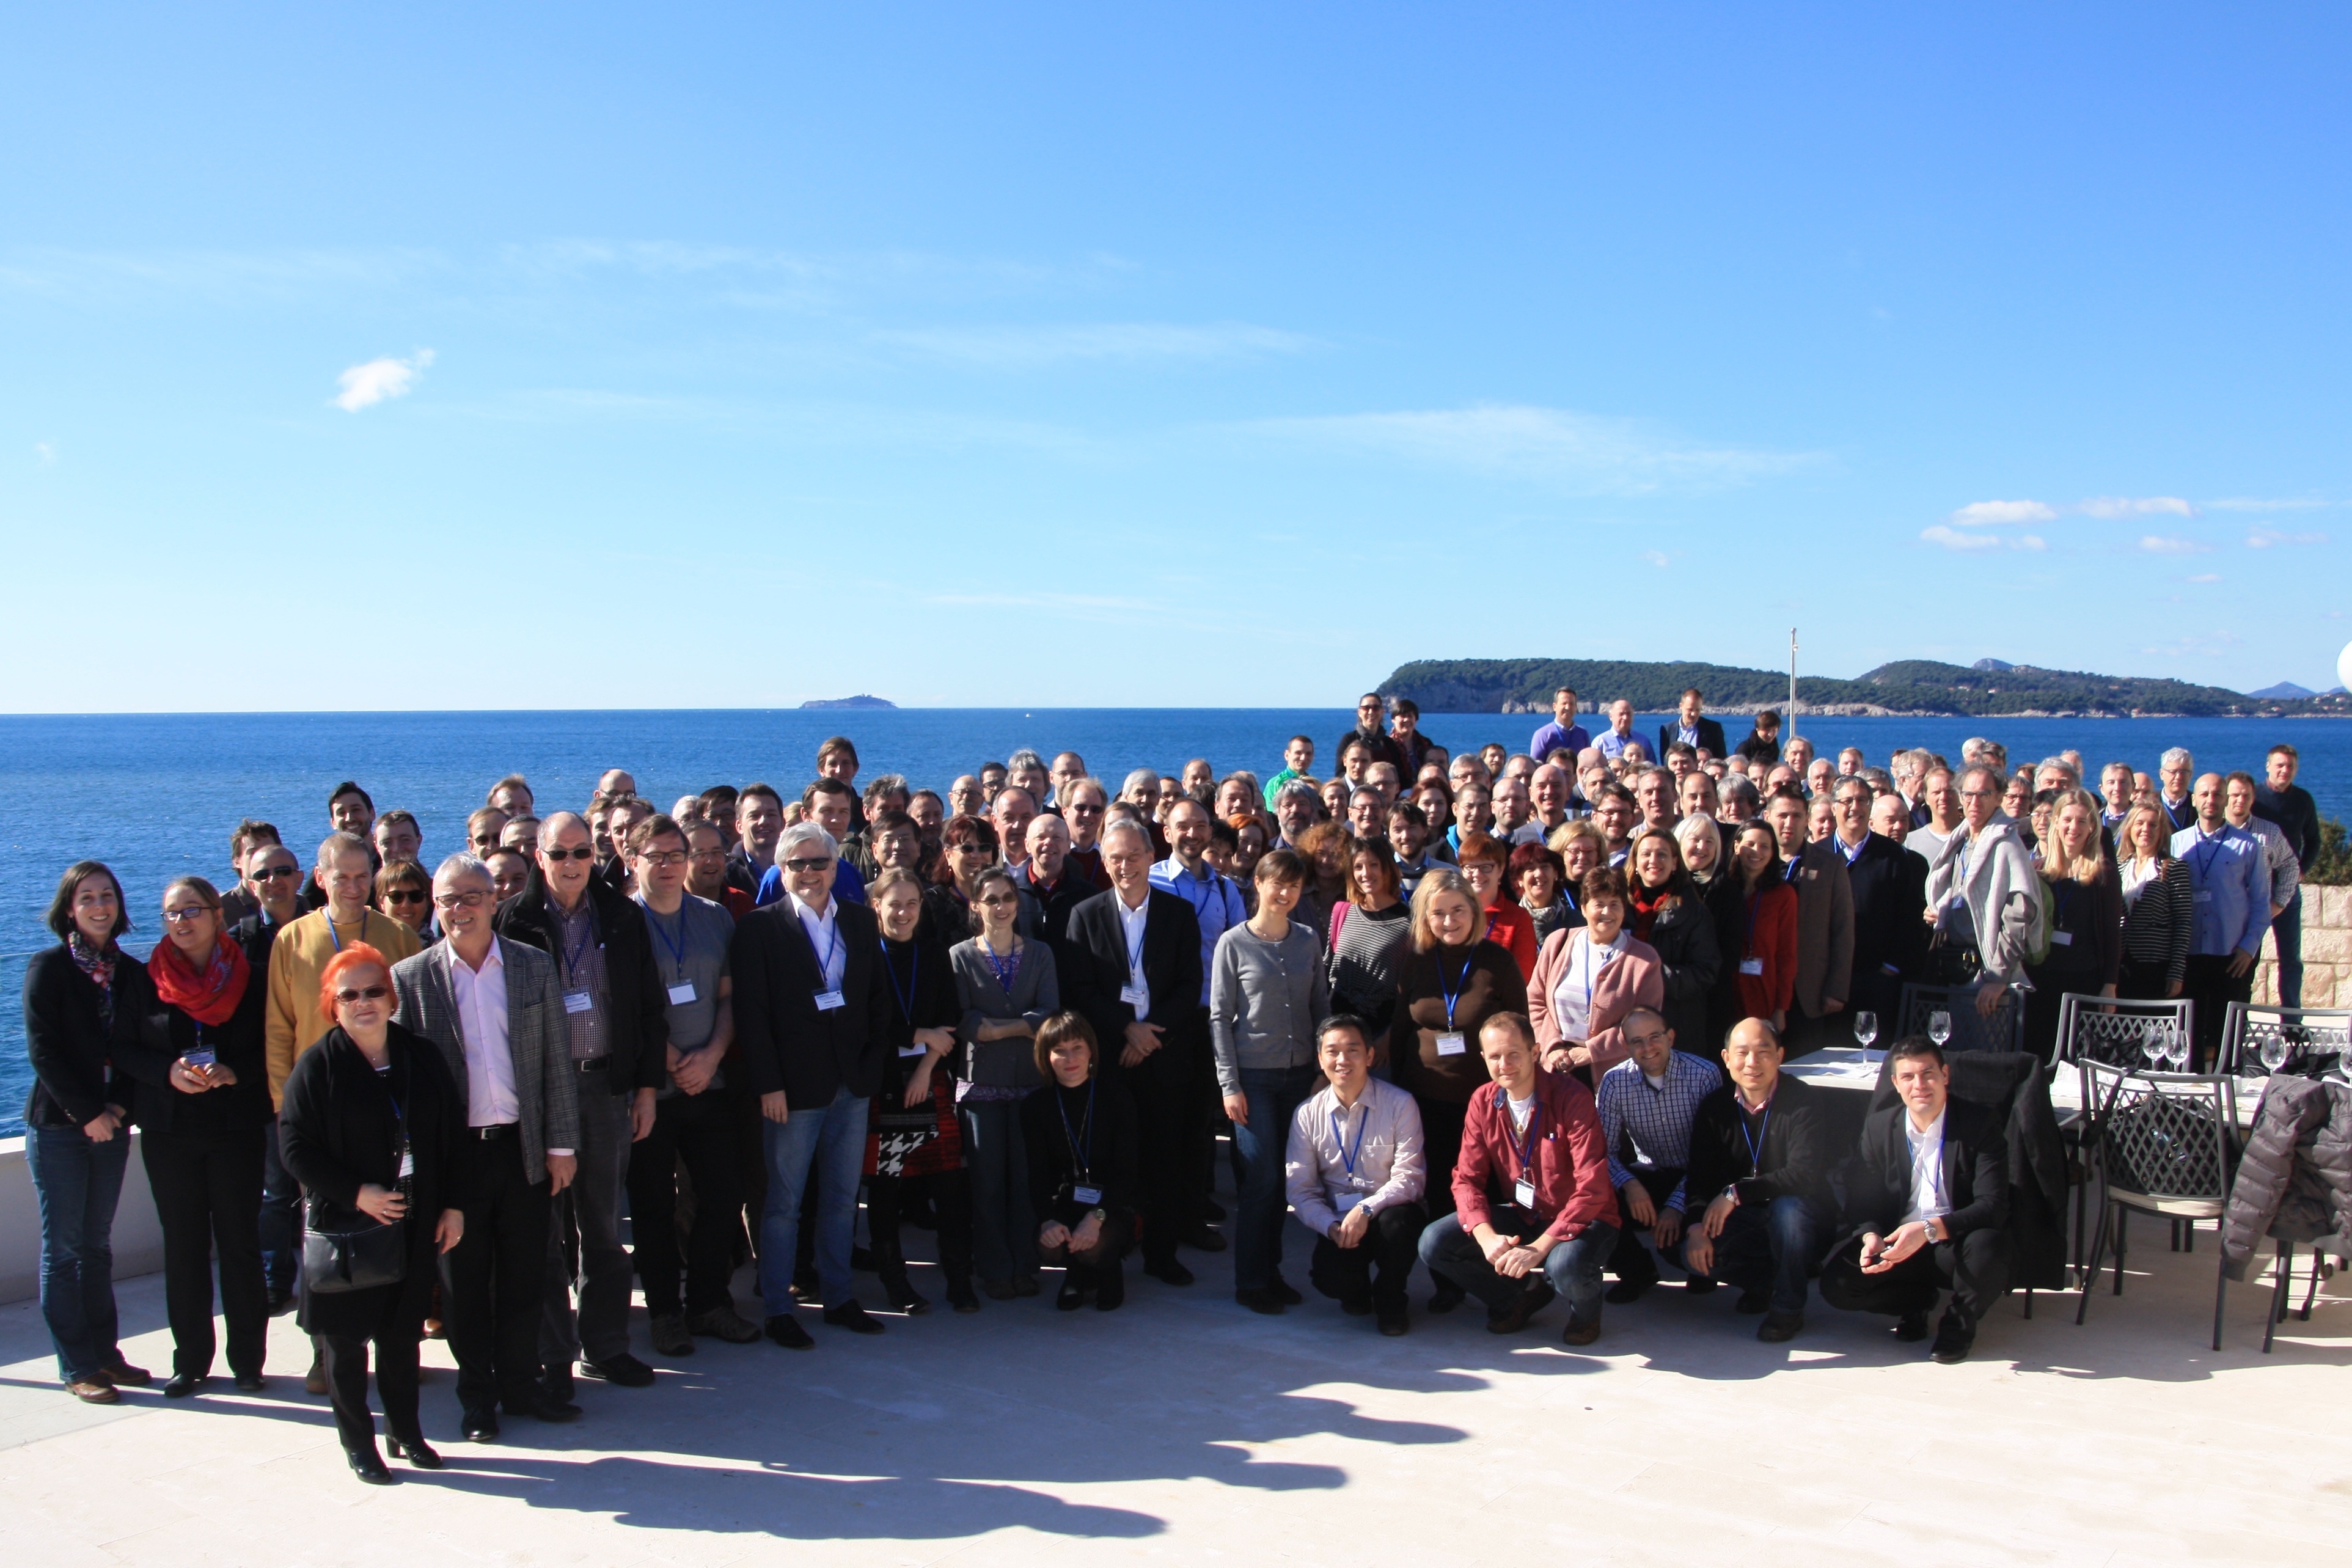 EURADOS Annual Meeting 2015 organized by RCDL was held in Dubrovnik from 9 to 12 February 2015